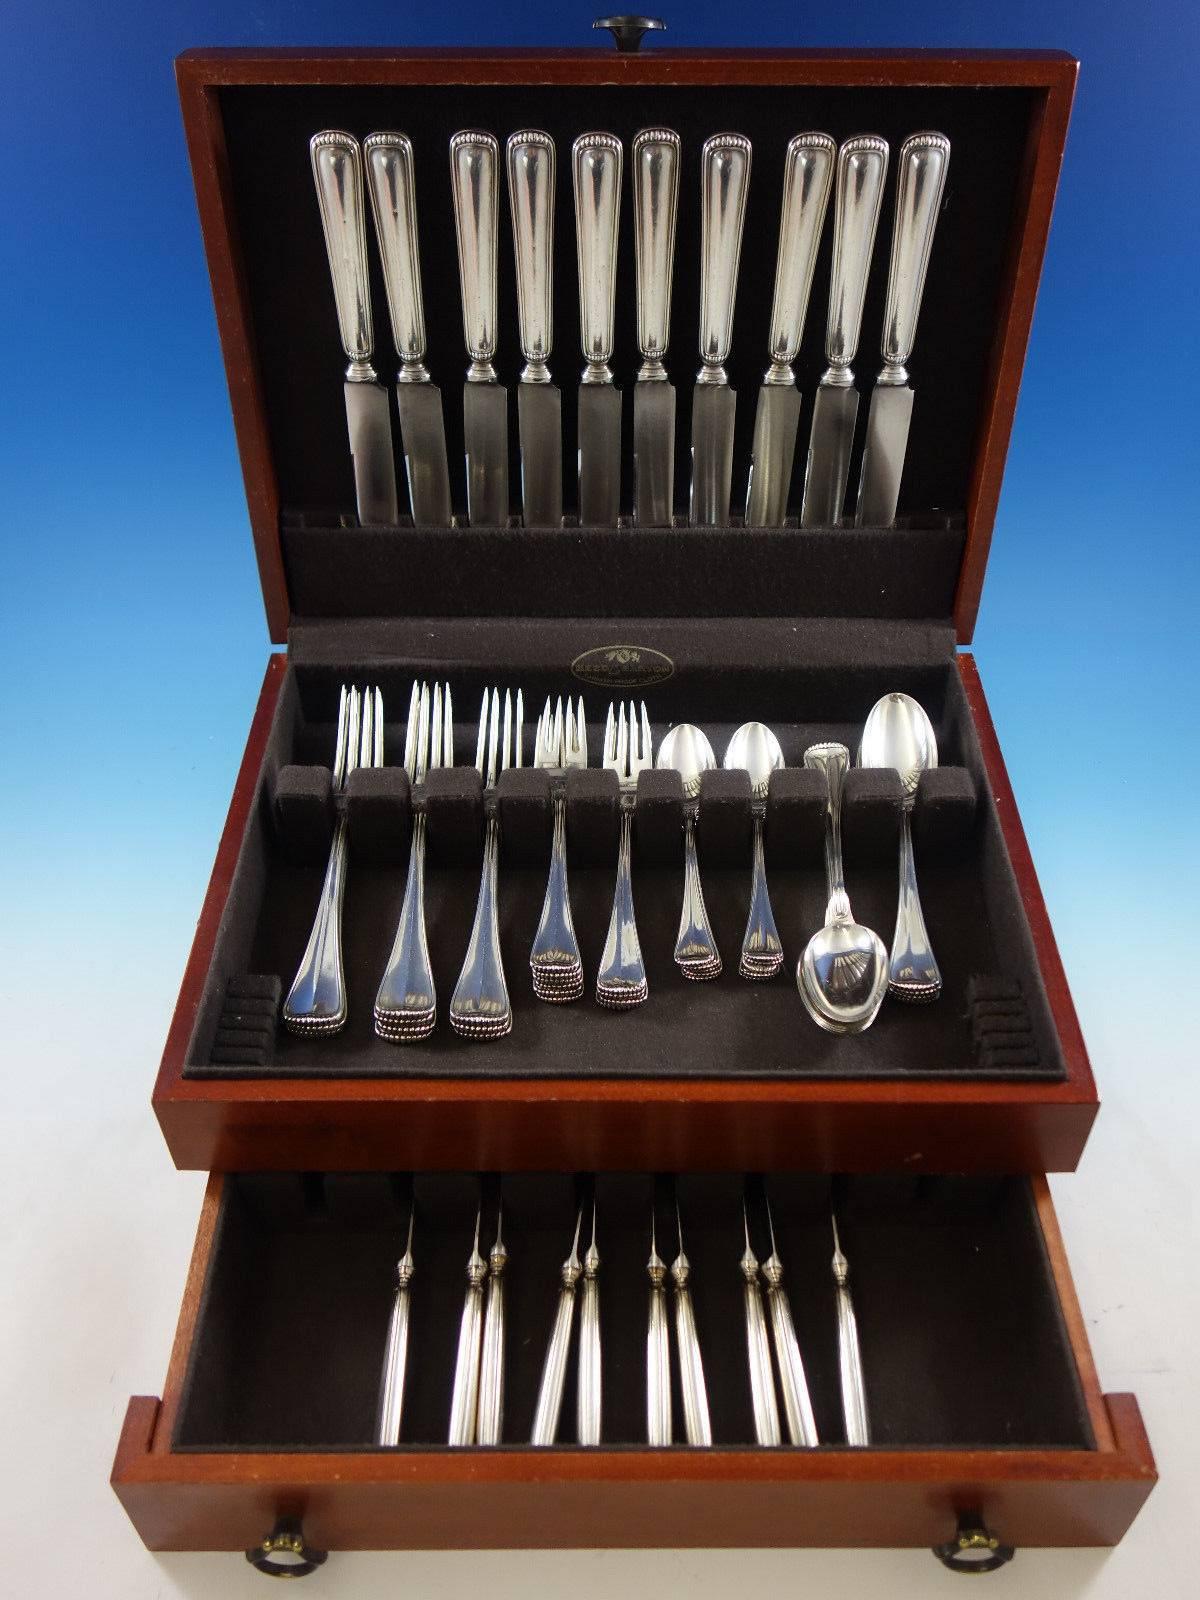 Dinner size Milano by Buccellati sterling silver flatware set- 60 pieces. This set includes: ten dinner size knives, 10", ten dinner size forks, 8 1/4", ten salad forks, 6 7/8", ten teaspoons, 6", ten place soup spoons, 7